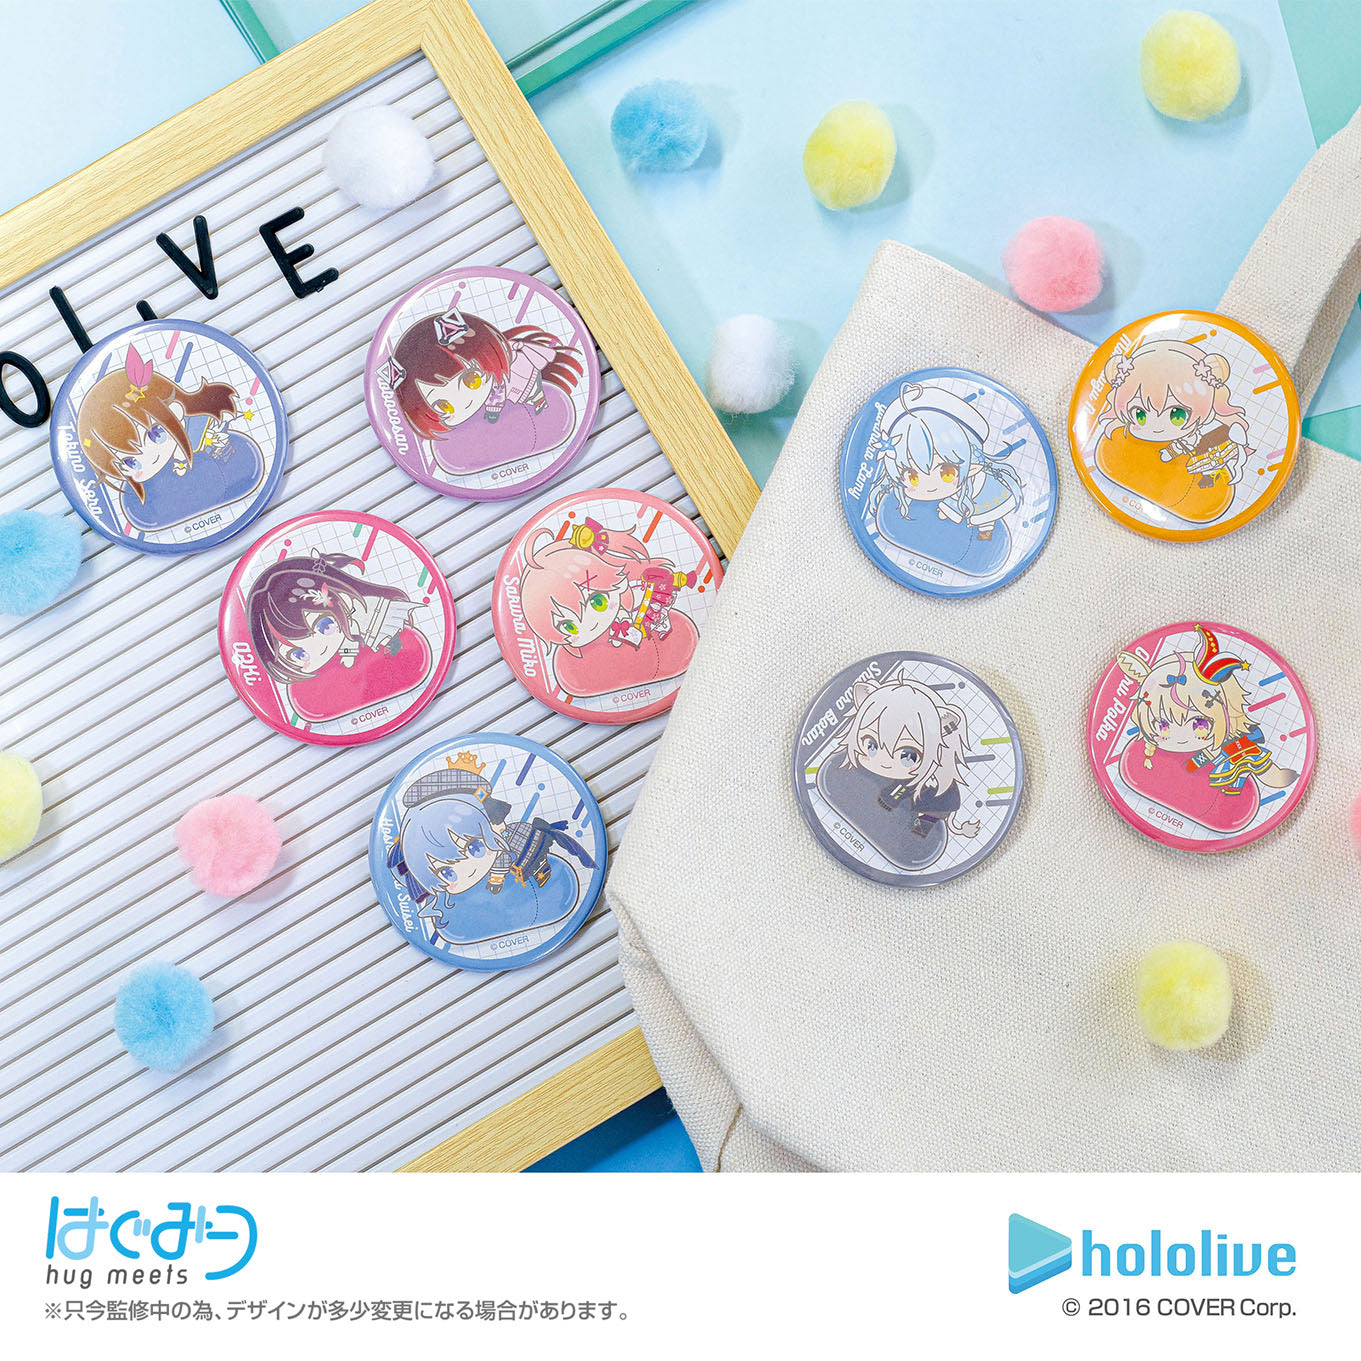 [In-stock] hololive x Hagmeets  Vol.1  Badge